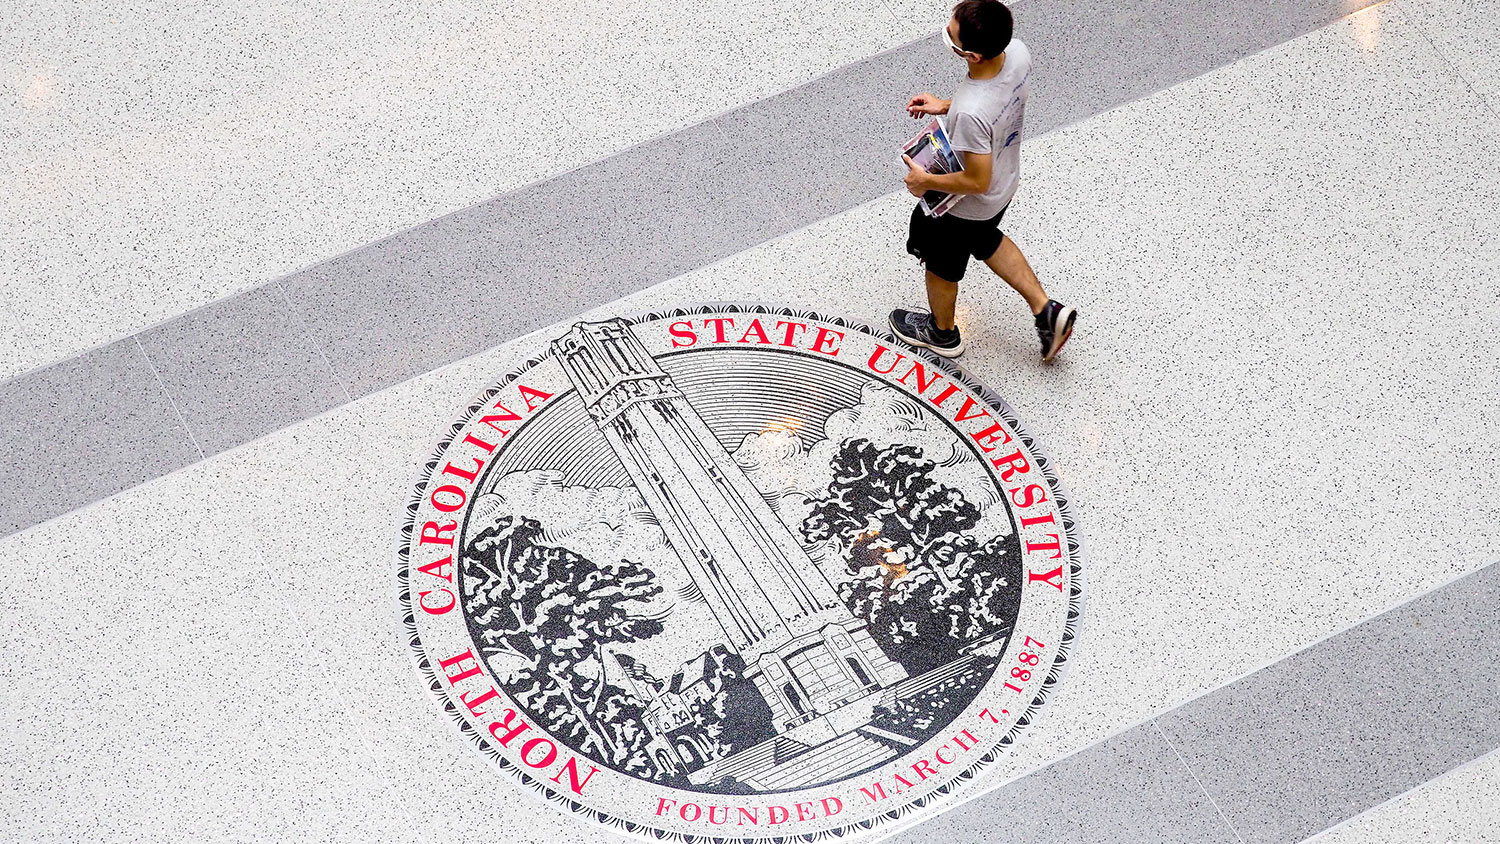 A student walks over the seal on the floor of Talley Student Union